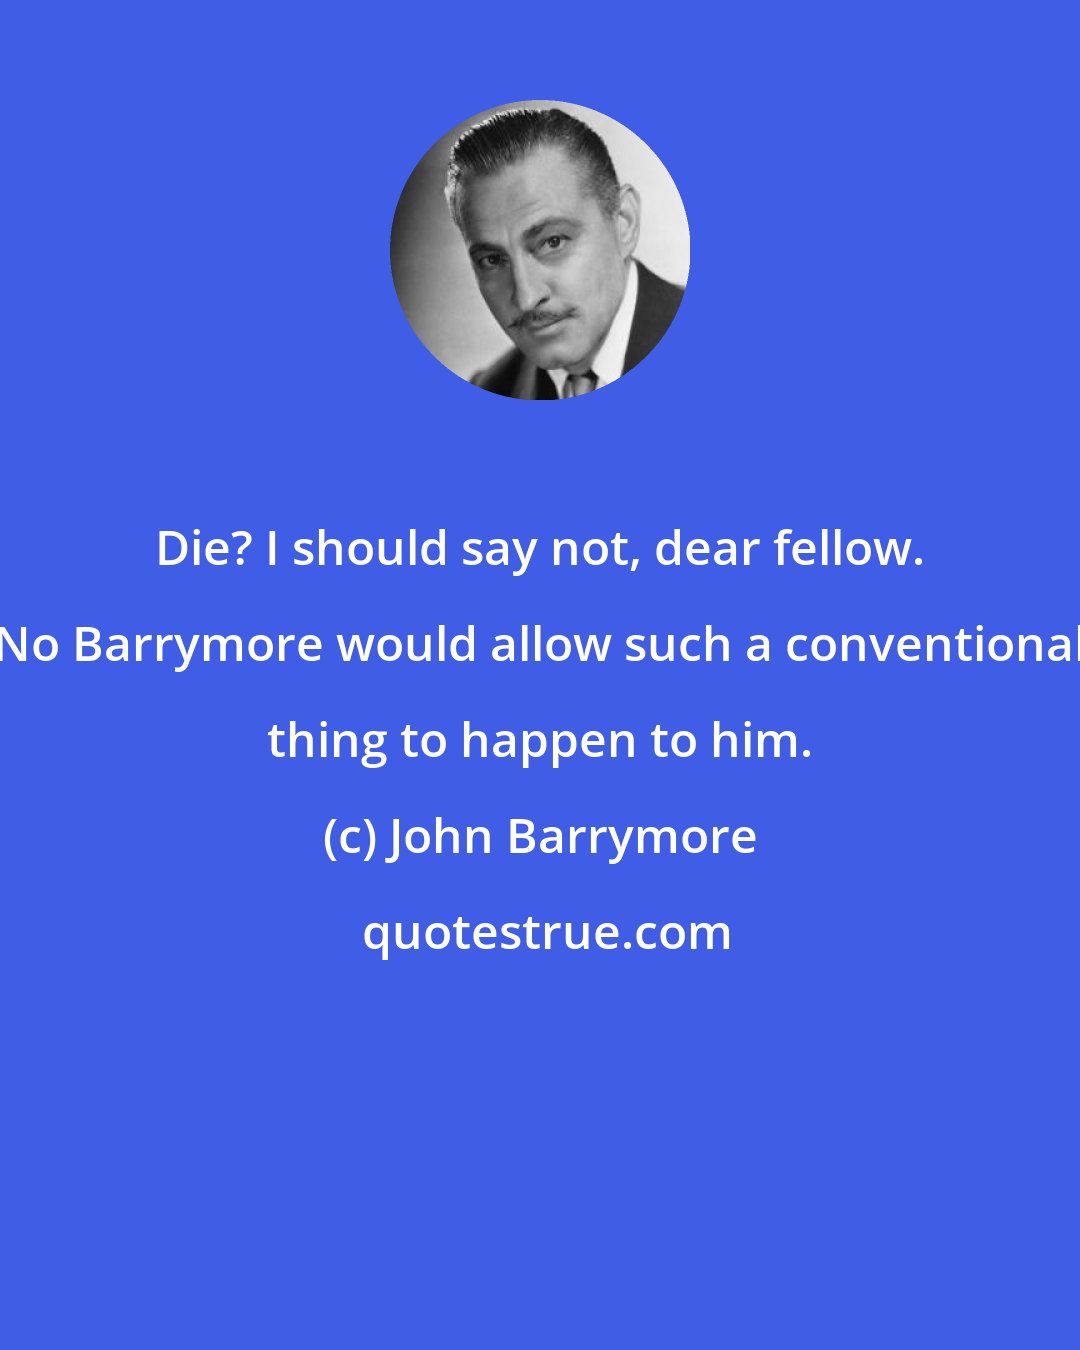 John Barrymore: Die? I should say not, dear fellow. No Barrymore would allow such a conventional thing to happen to him.